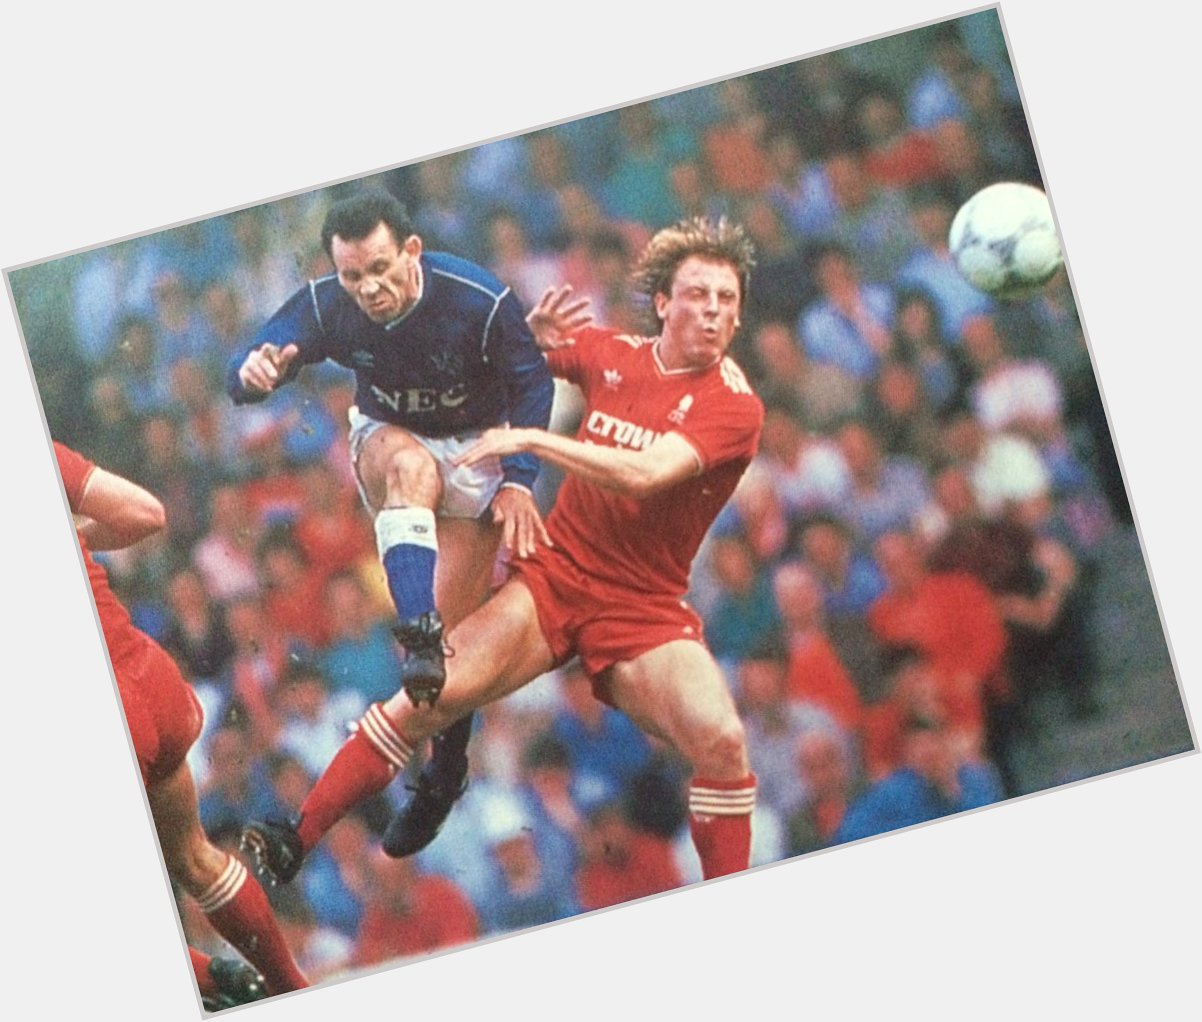 For all those that got it correct.

It was tough tackling Steve McMahon. Happy birthday 